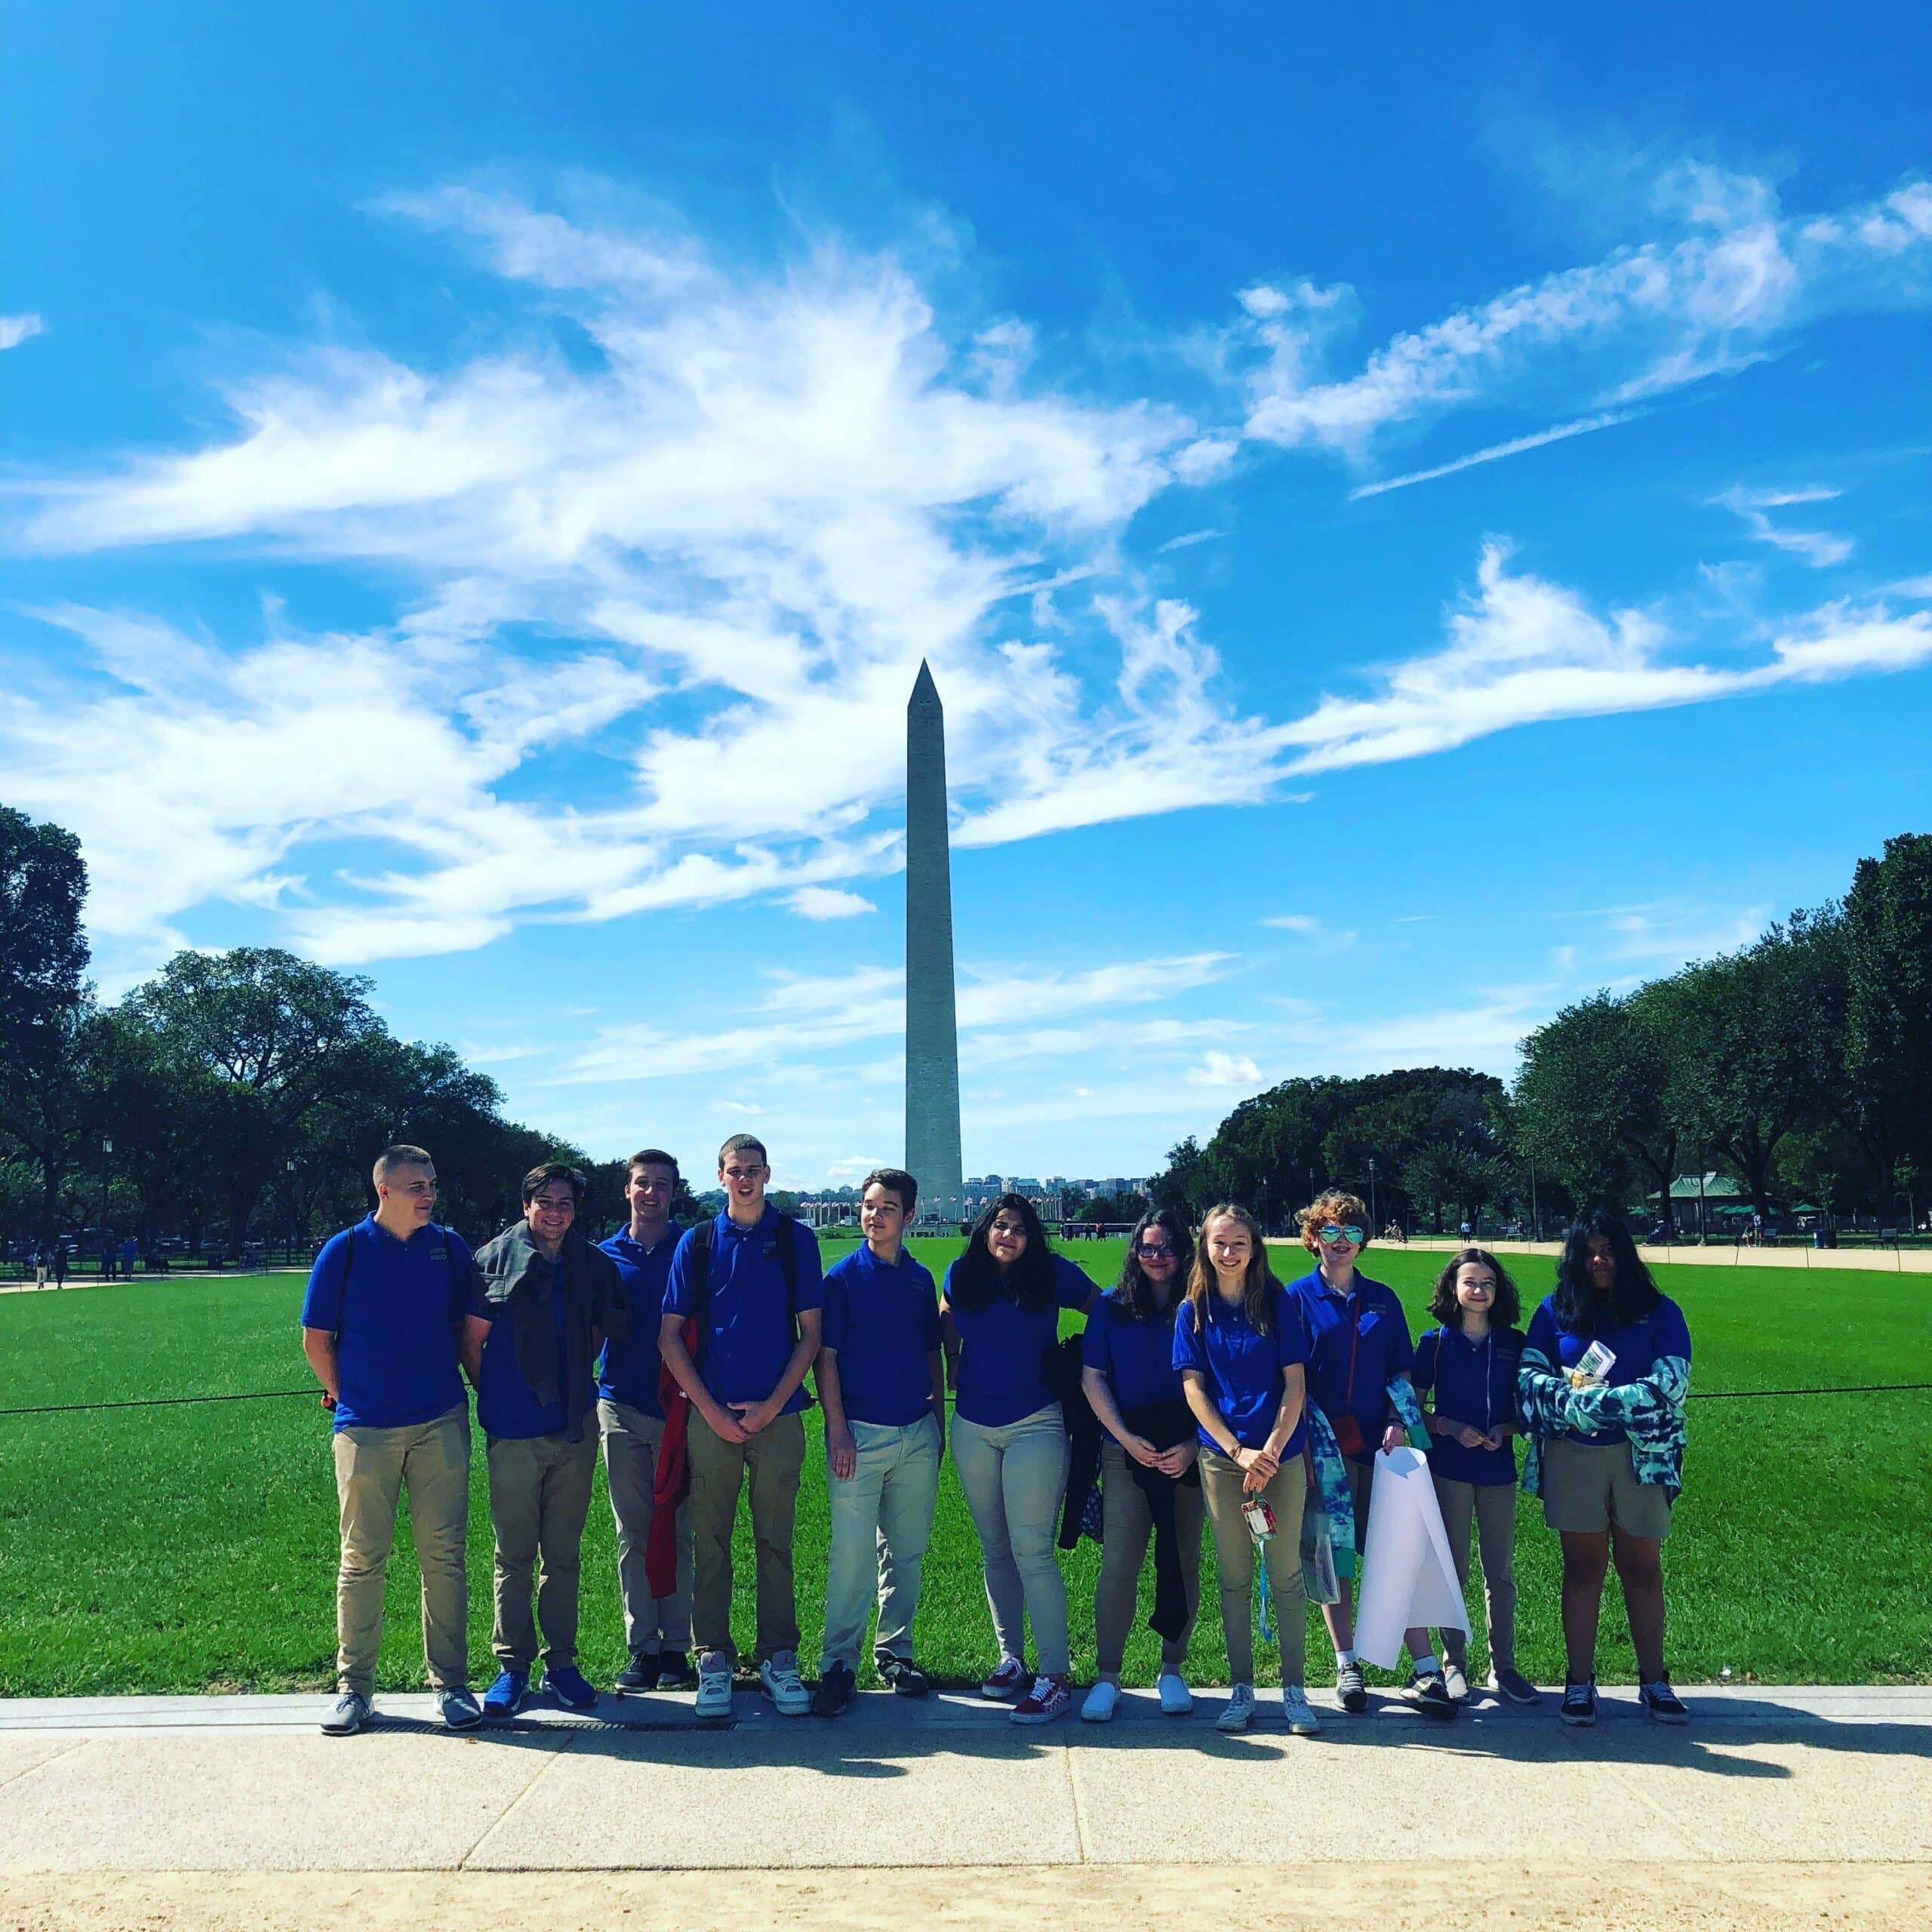 Students in front of the Washington Monument